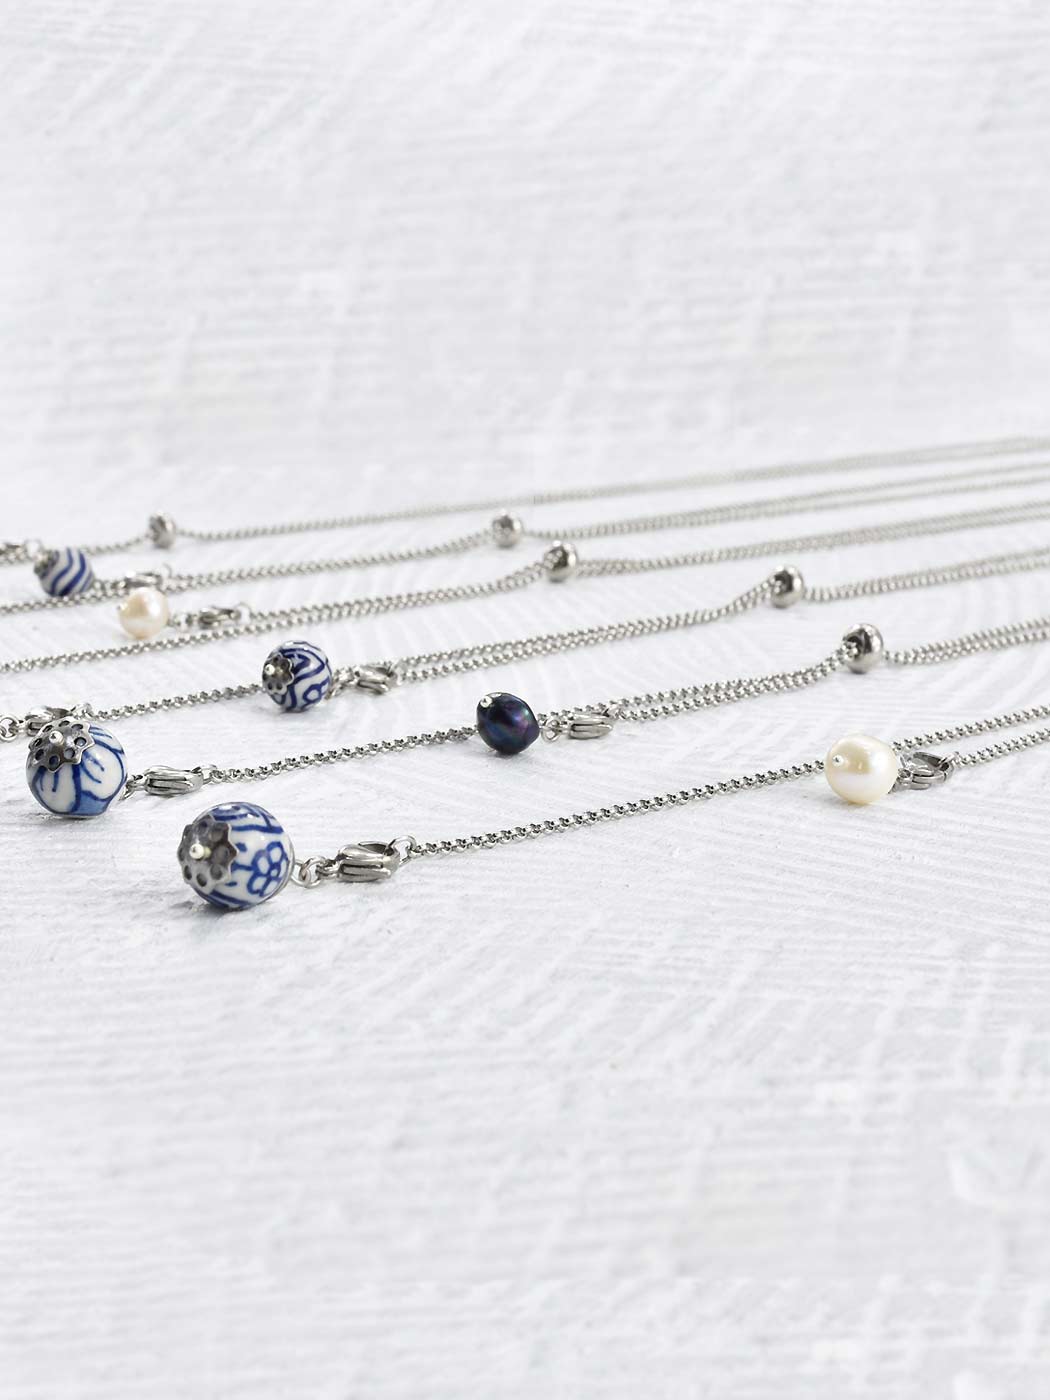 Proud Pearls new collection Dutch Delftware necklaces